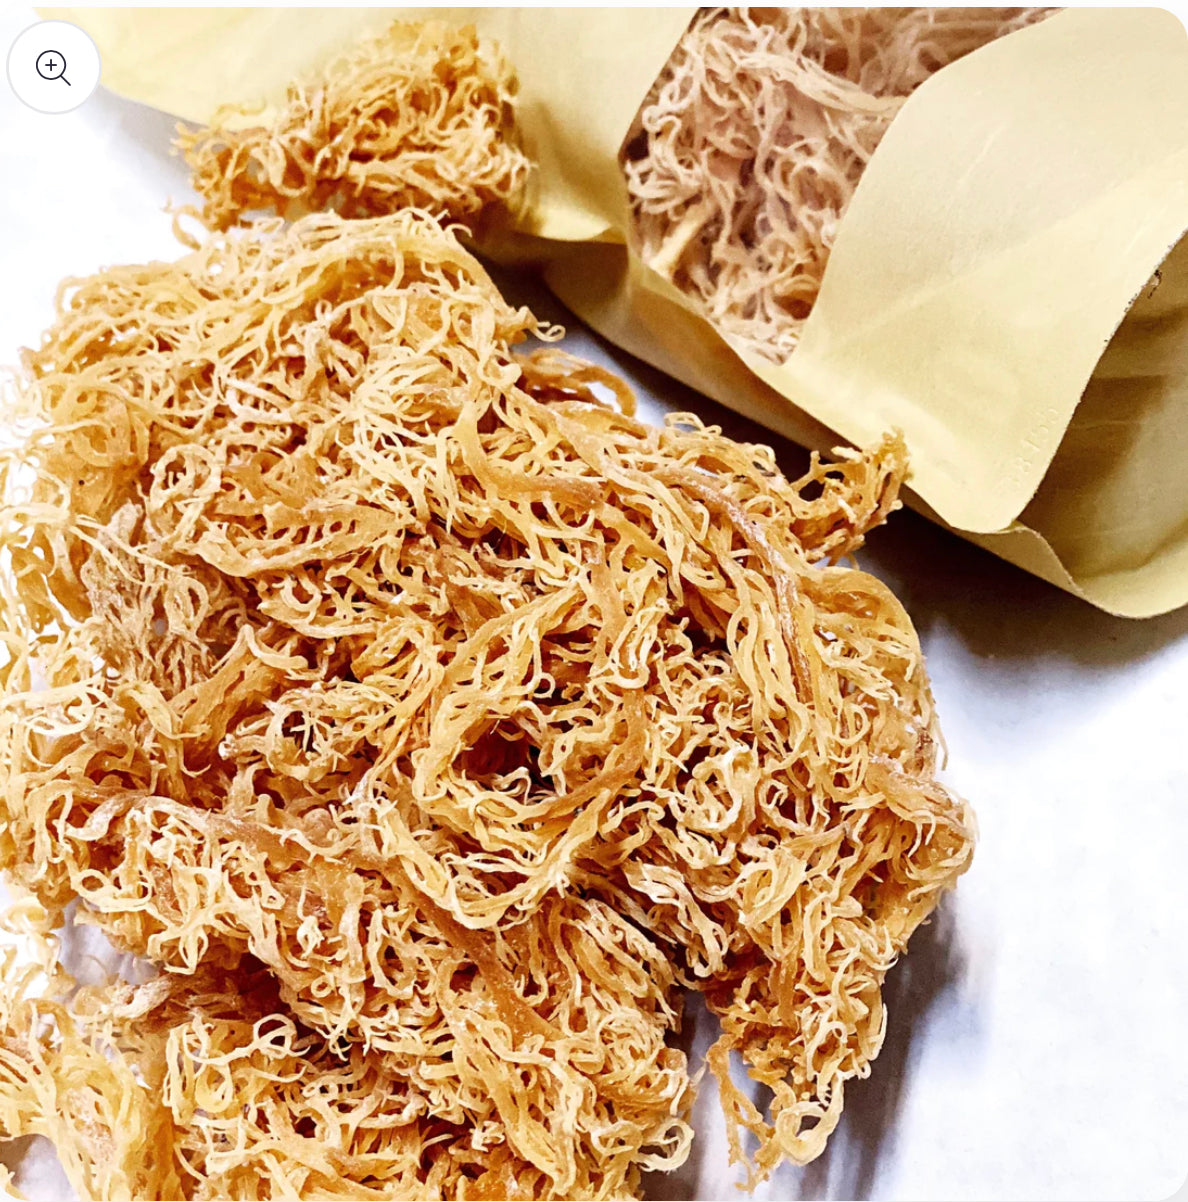 Irish Sea Moss 100 g – Roots and Culture